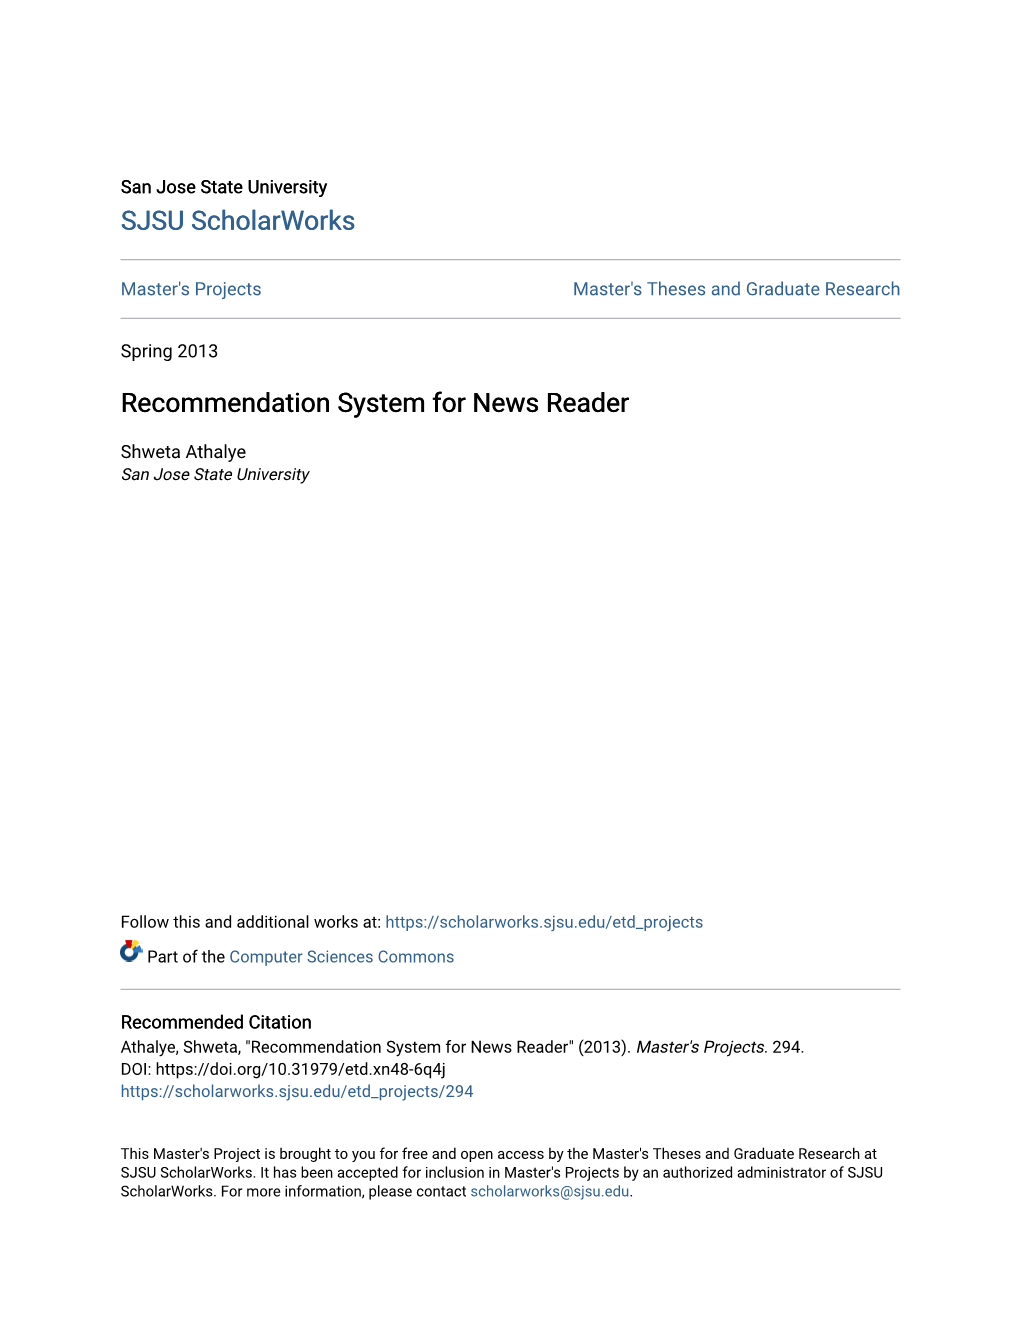 Recommendation System for News Reader